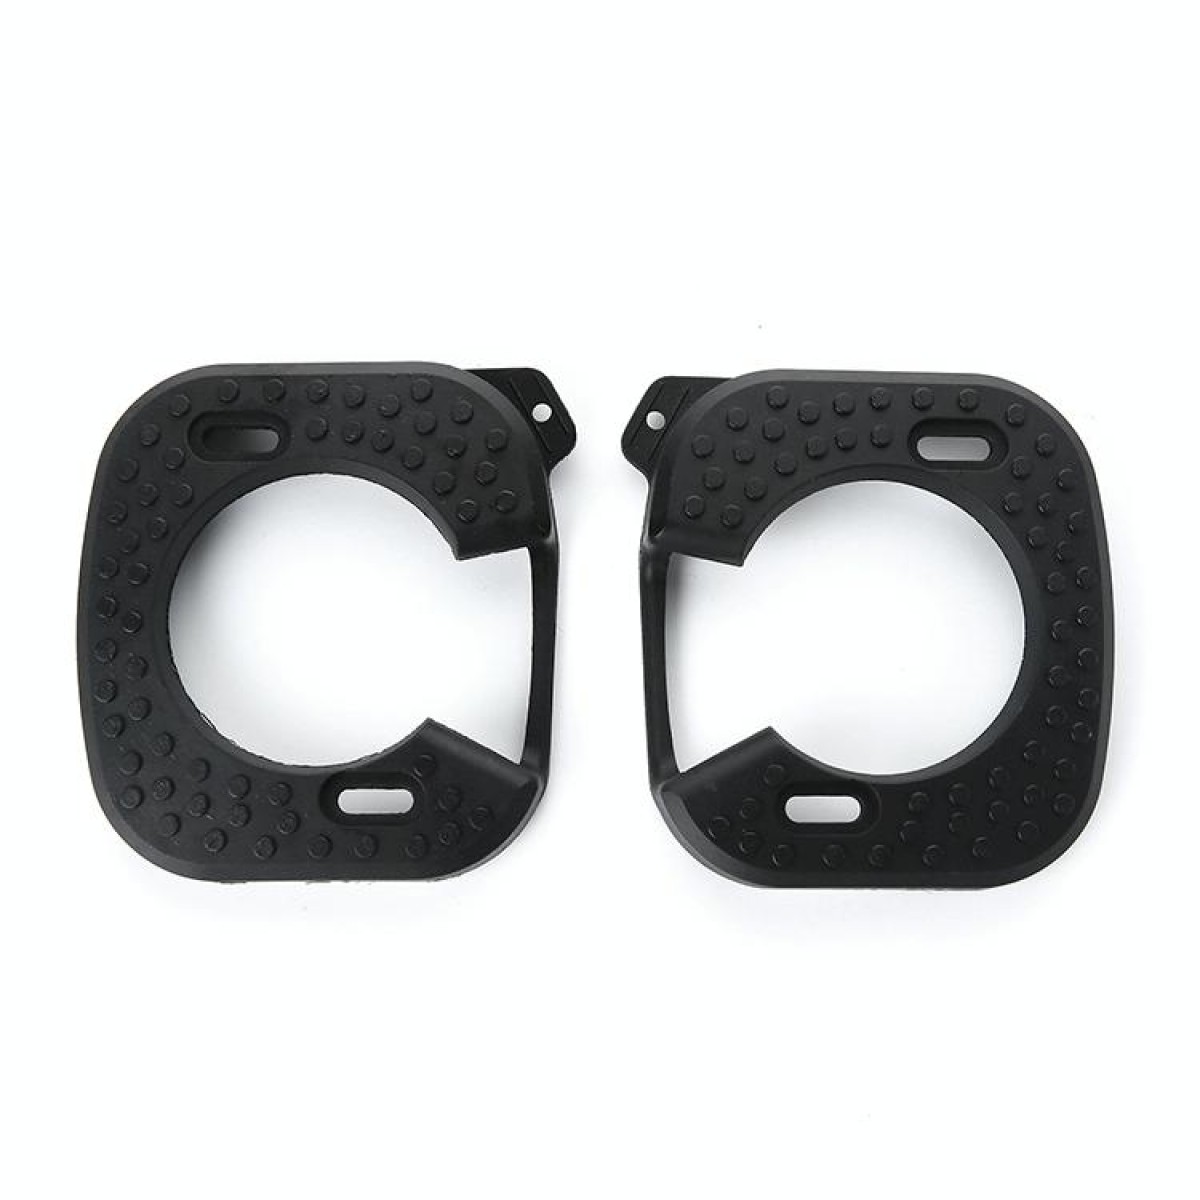 One Pair Cleats Protective Covers for SpeedPlay Zero SpeedPlay Light Action Cleats